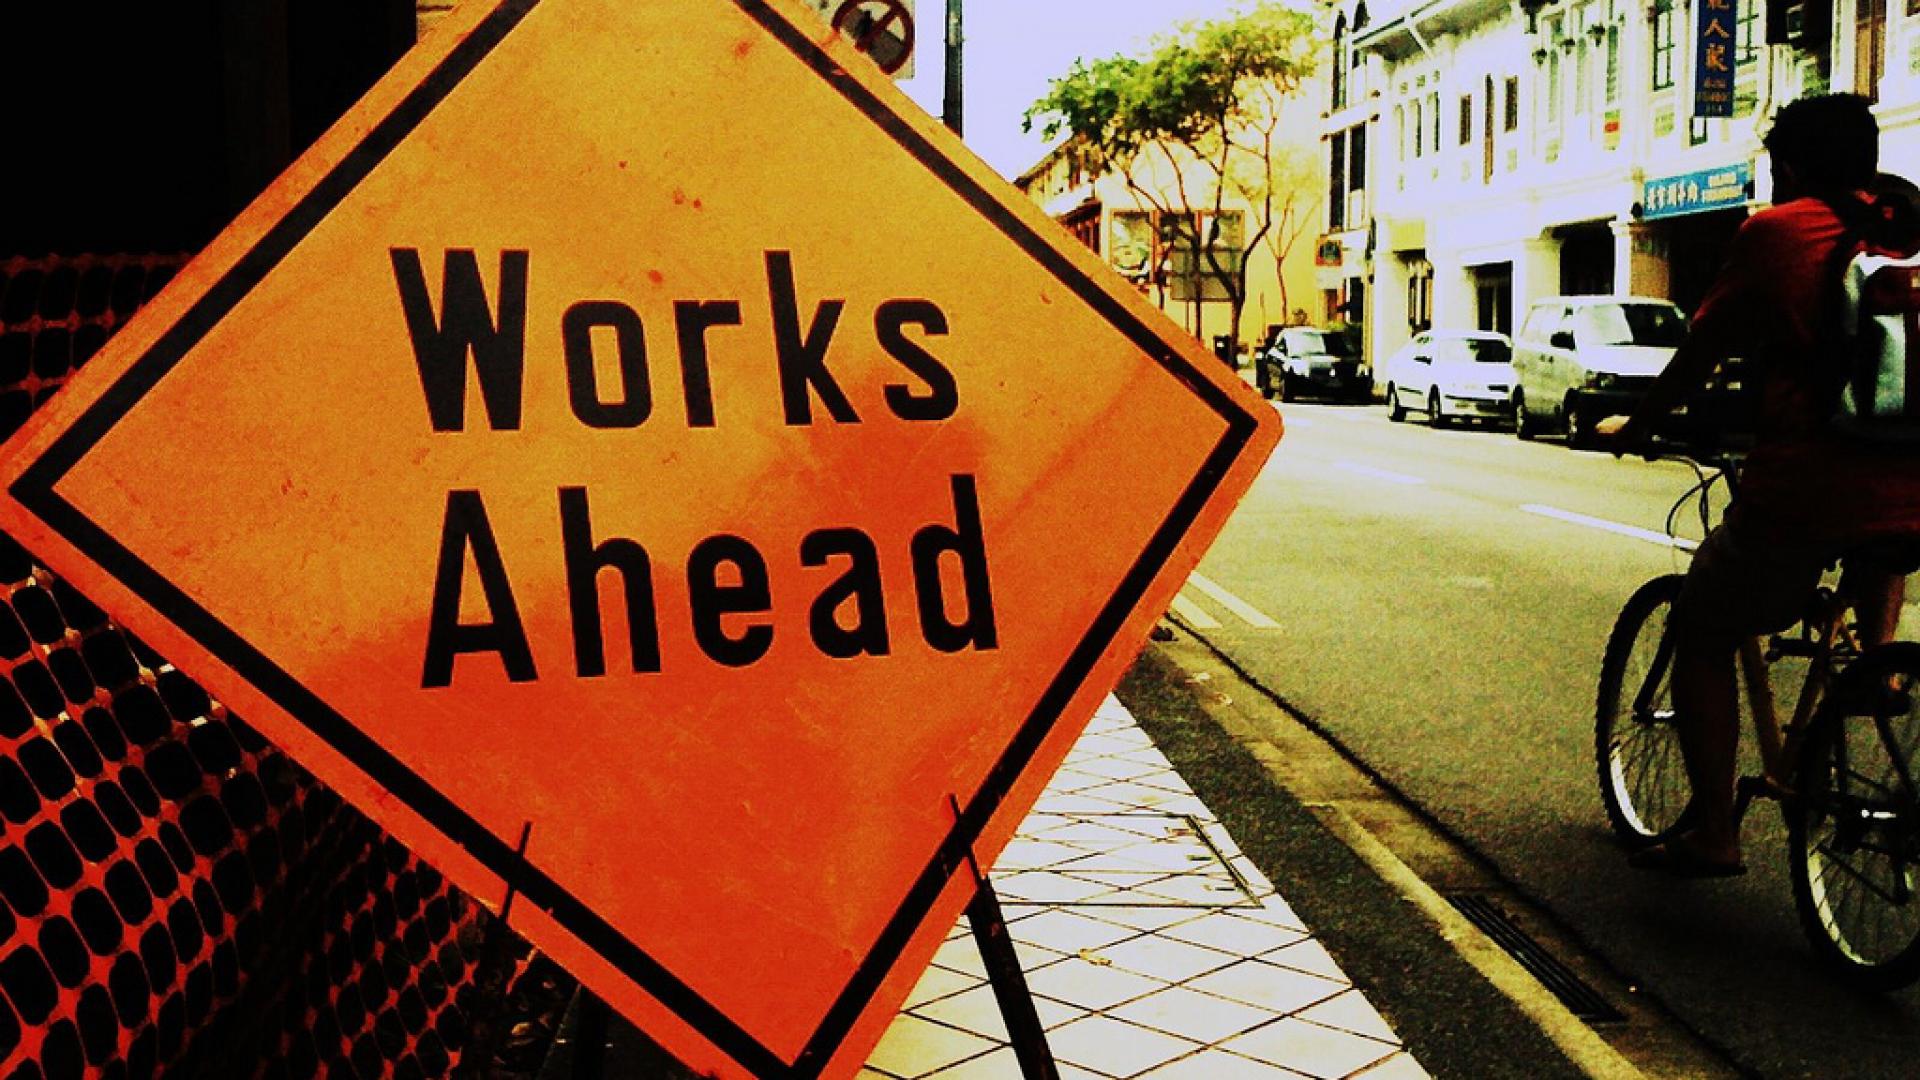 works ahead sign